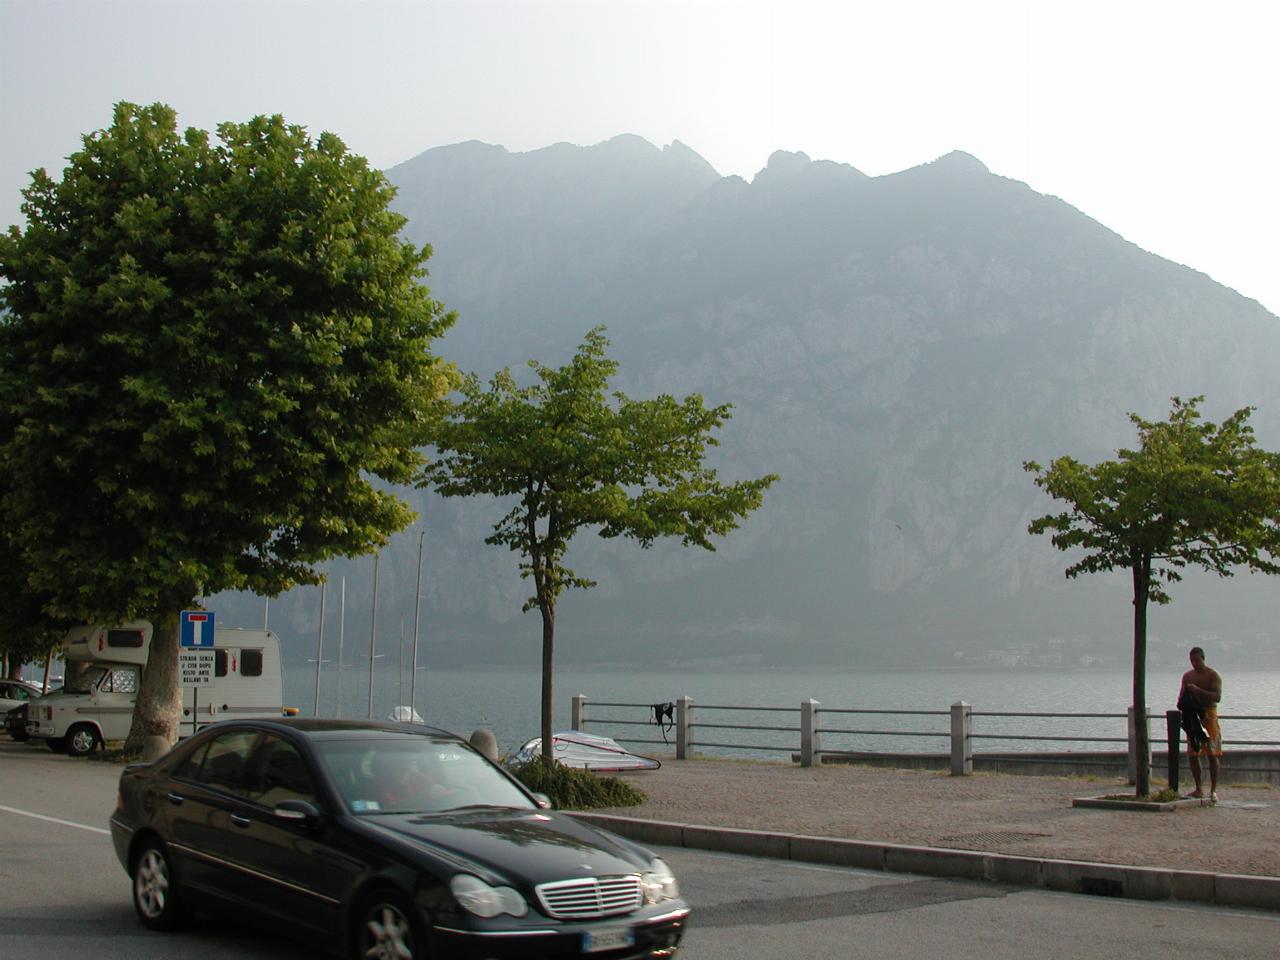 Looking towards Lecco (across Lake Lecco) on a hazy morning